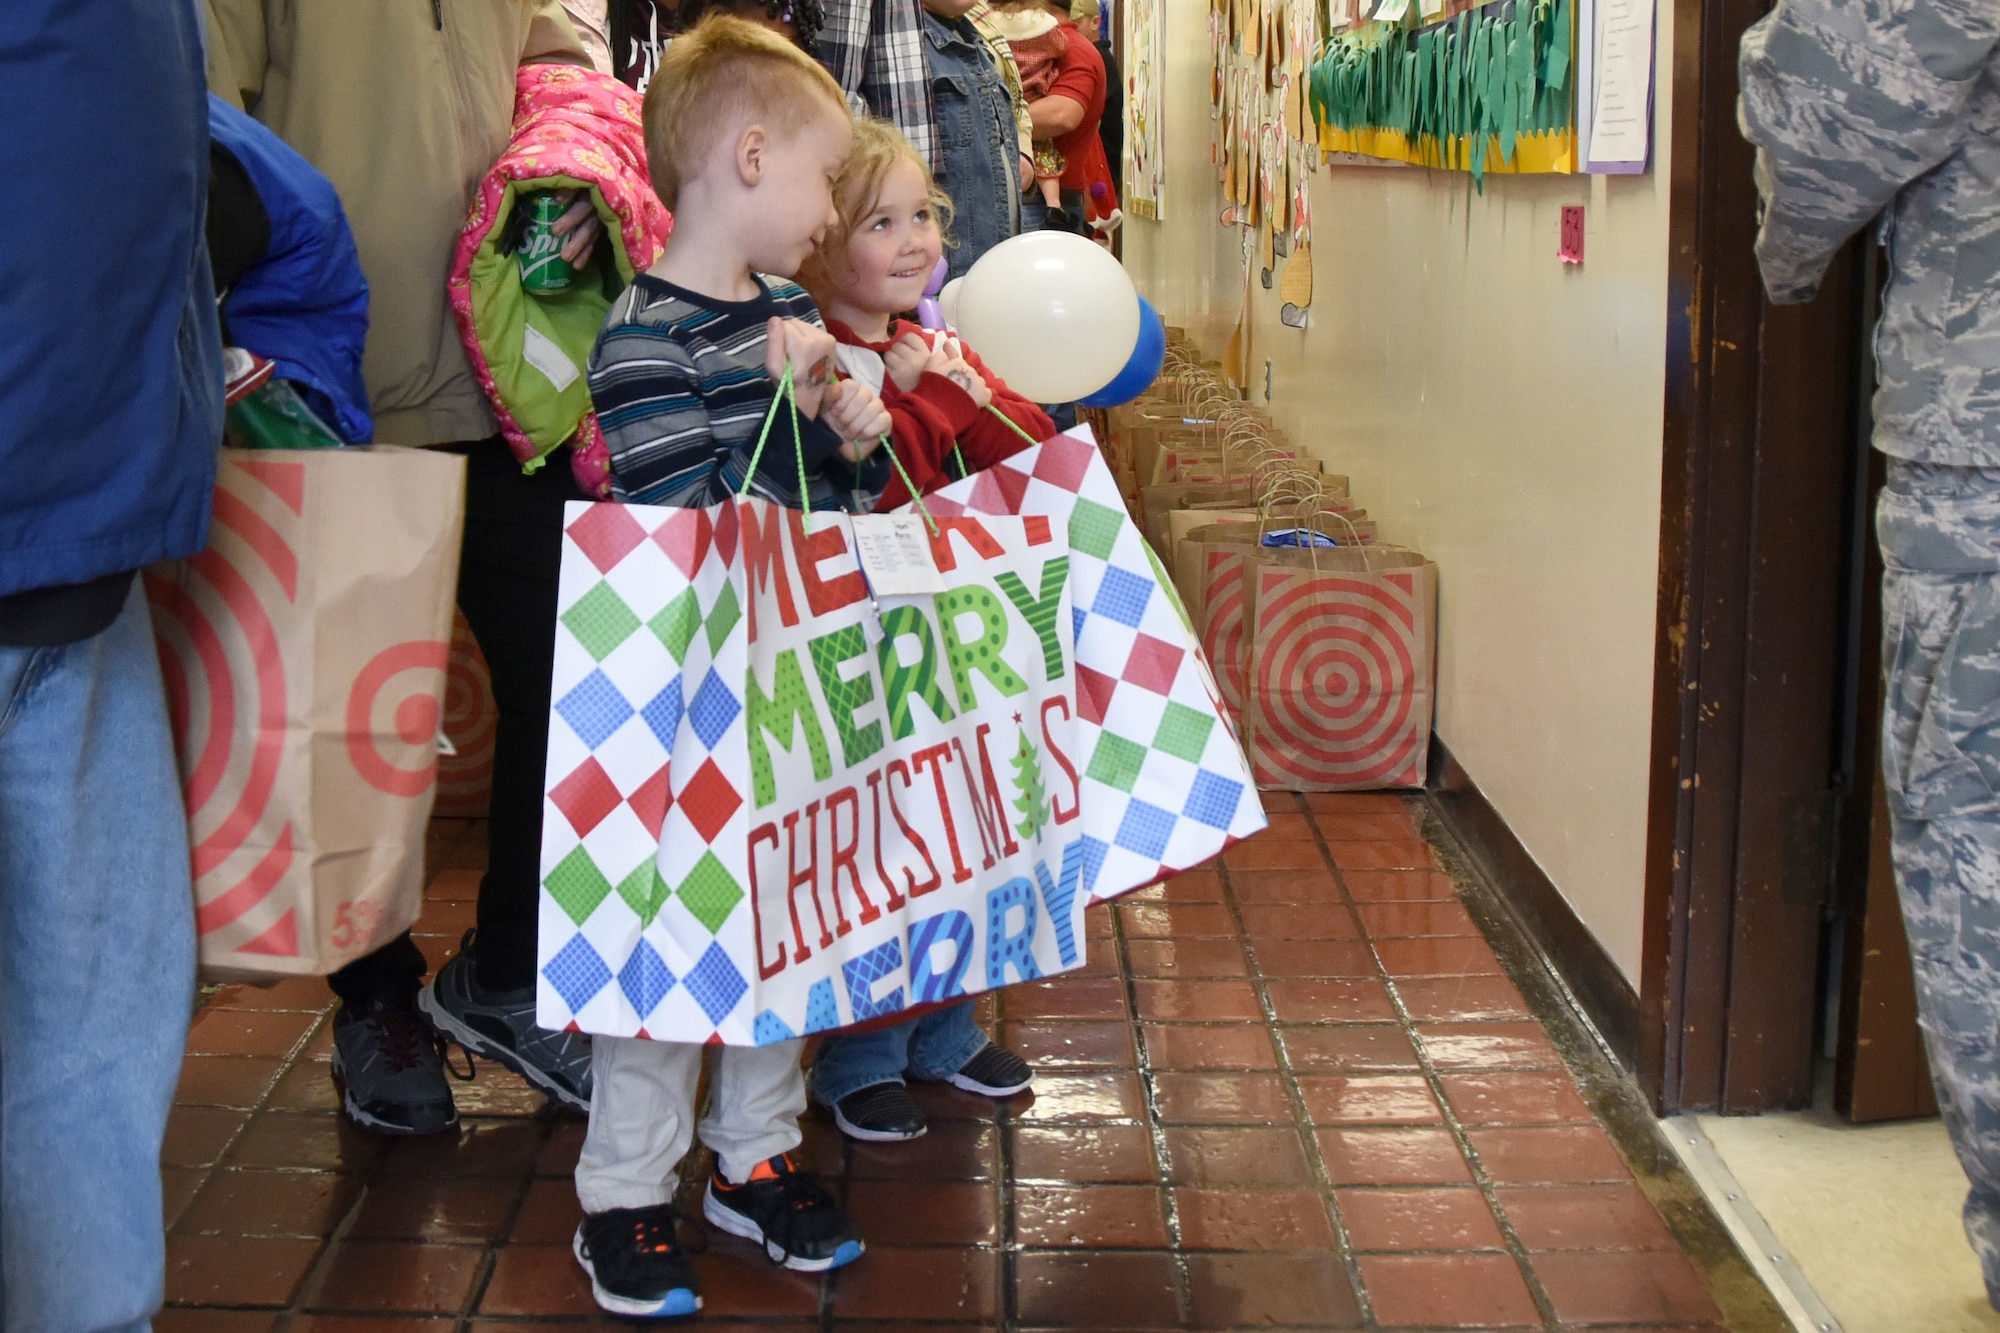 Young students of Badin Elementary School (B.E.S.) receive presents during Operation Santa held at B.E.S., Badin, N.C., Dec. 14th, 2019.  Operation Santa is an annual event run by the Chapter 7 organization of the North Carolina Air National Guard (NCANG) which chooses select schools to provide assistance to families during the holiday season. This year, the NCANG provided presents, lunch, music, bouncy castles and a Santa. The NCANG also partnered with the local Target for food donations.